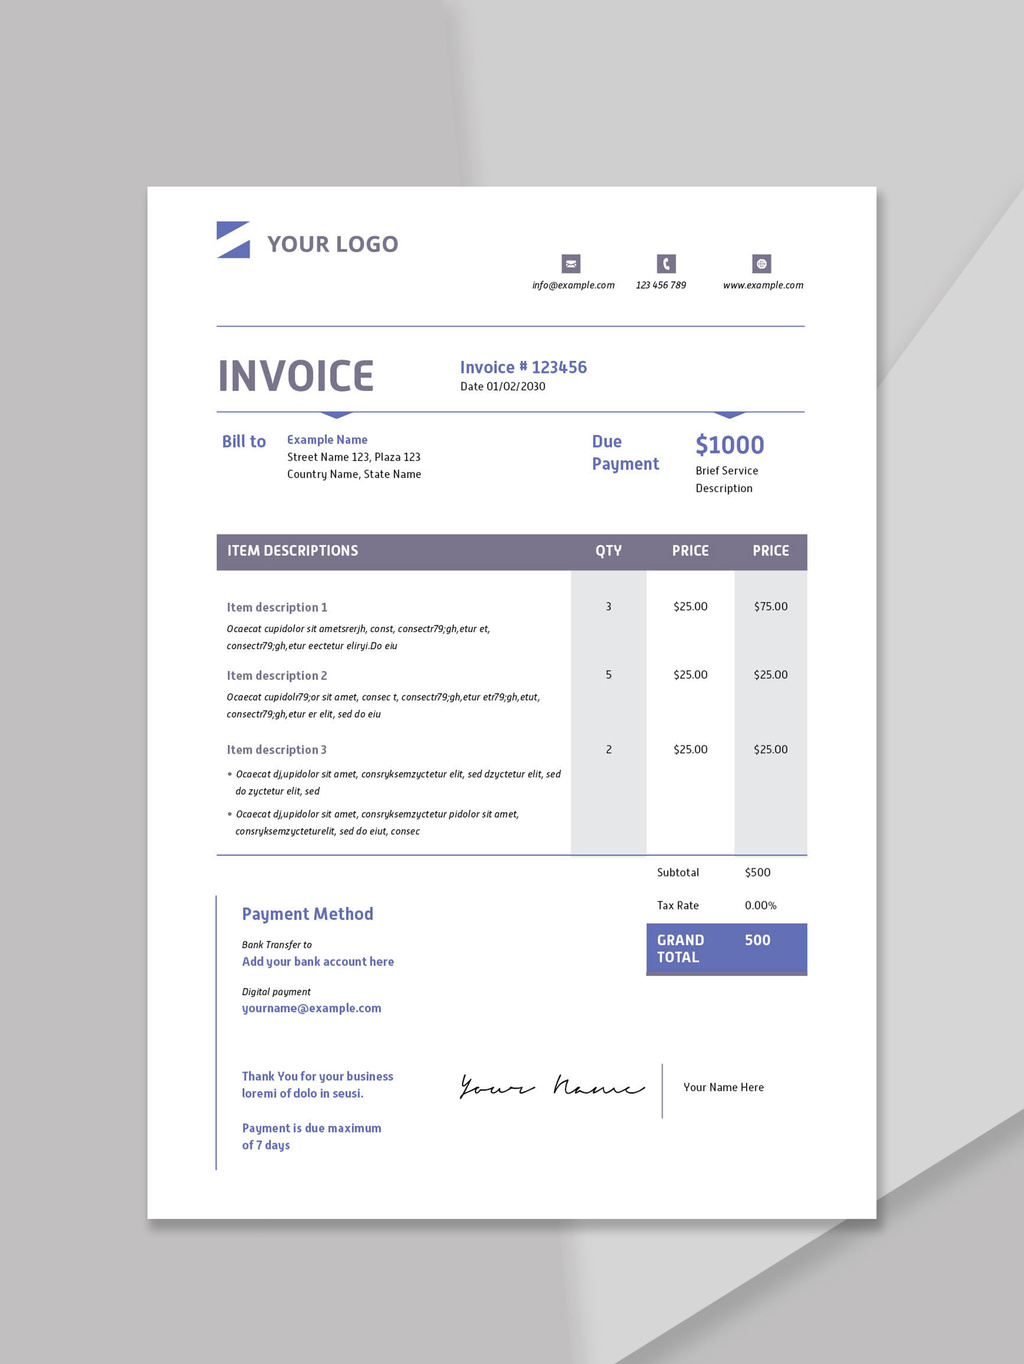 Invoice Layout with Blue Color